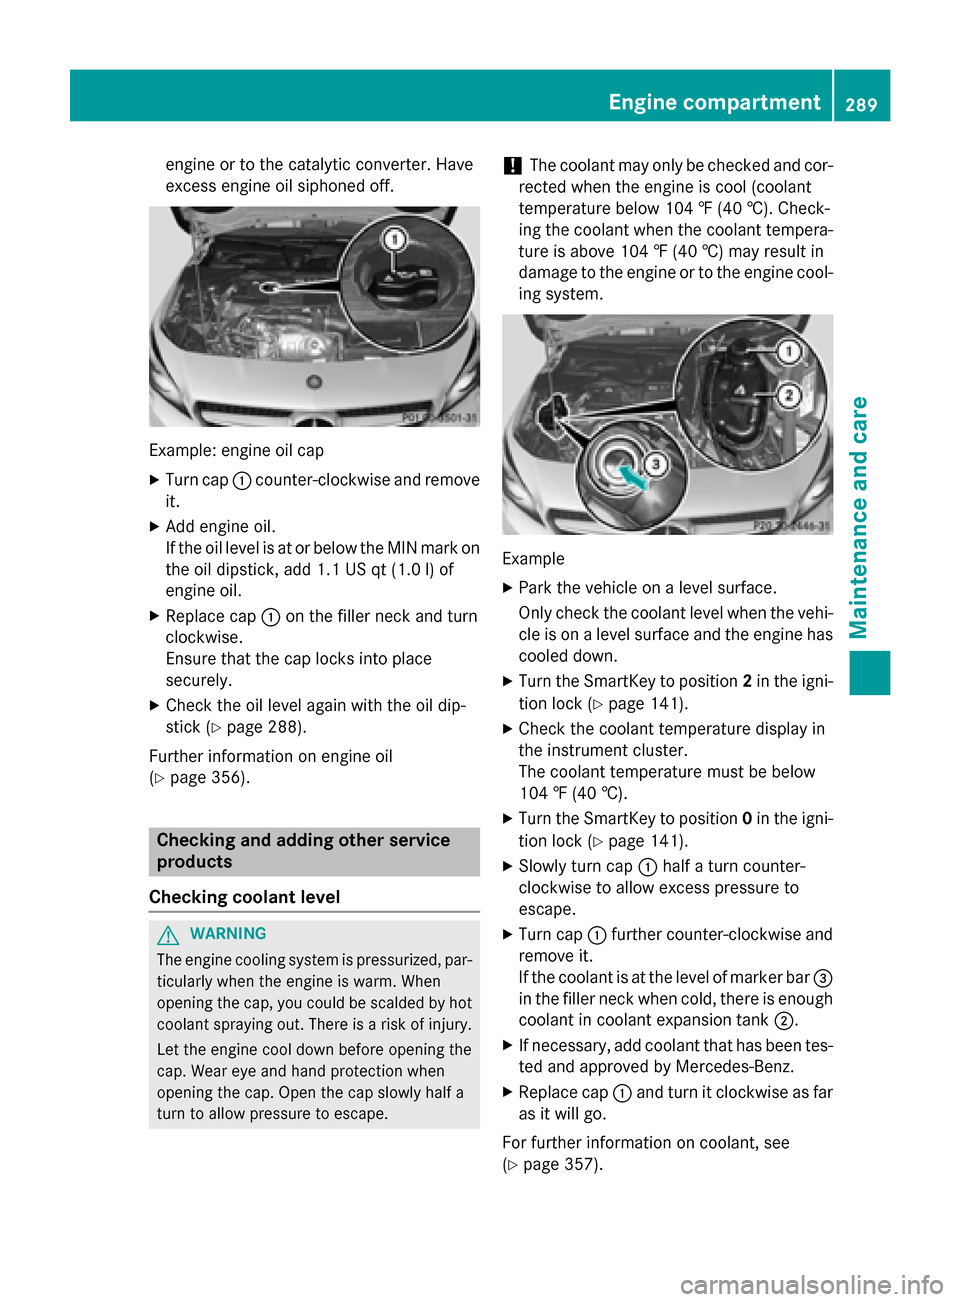 MERCEDES-BENZ CLA-Class 2015 C117 User Guide engine or to the catalytic converter. Have
excess engine oil siphoned off. Example: engine oil cap
X Turn cap :counter-clockwise and remove
it.
X Add engine oil.
If the oil level is at or below the MI